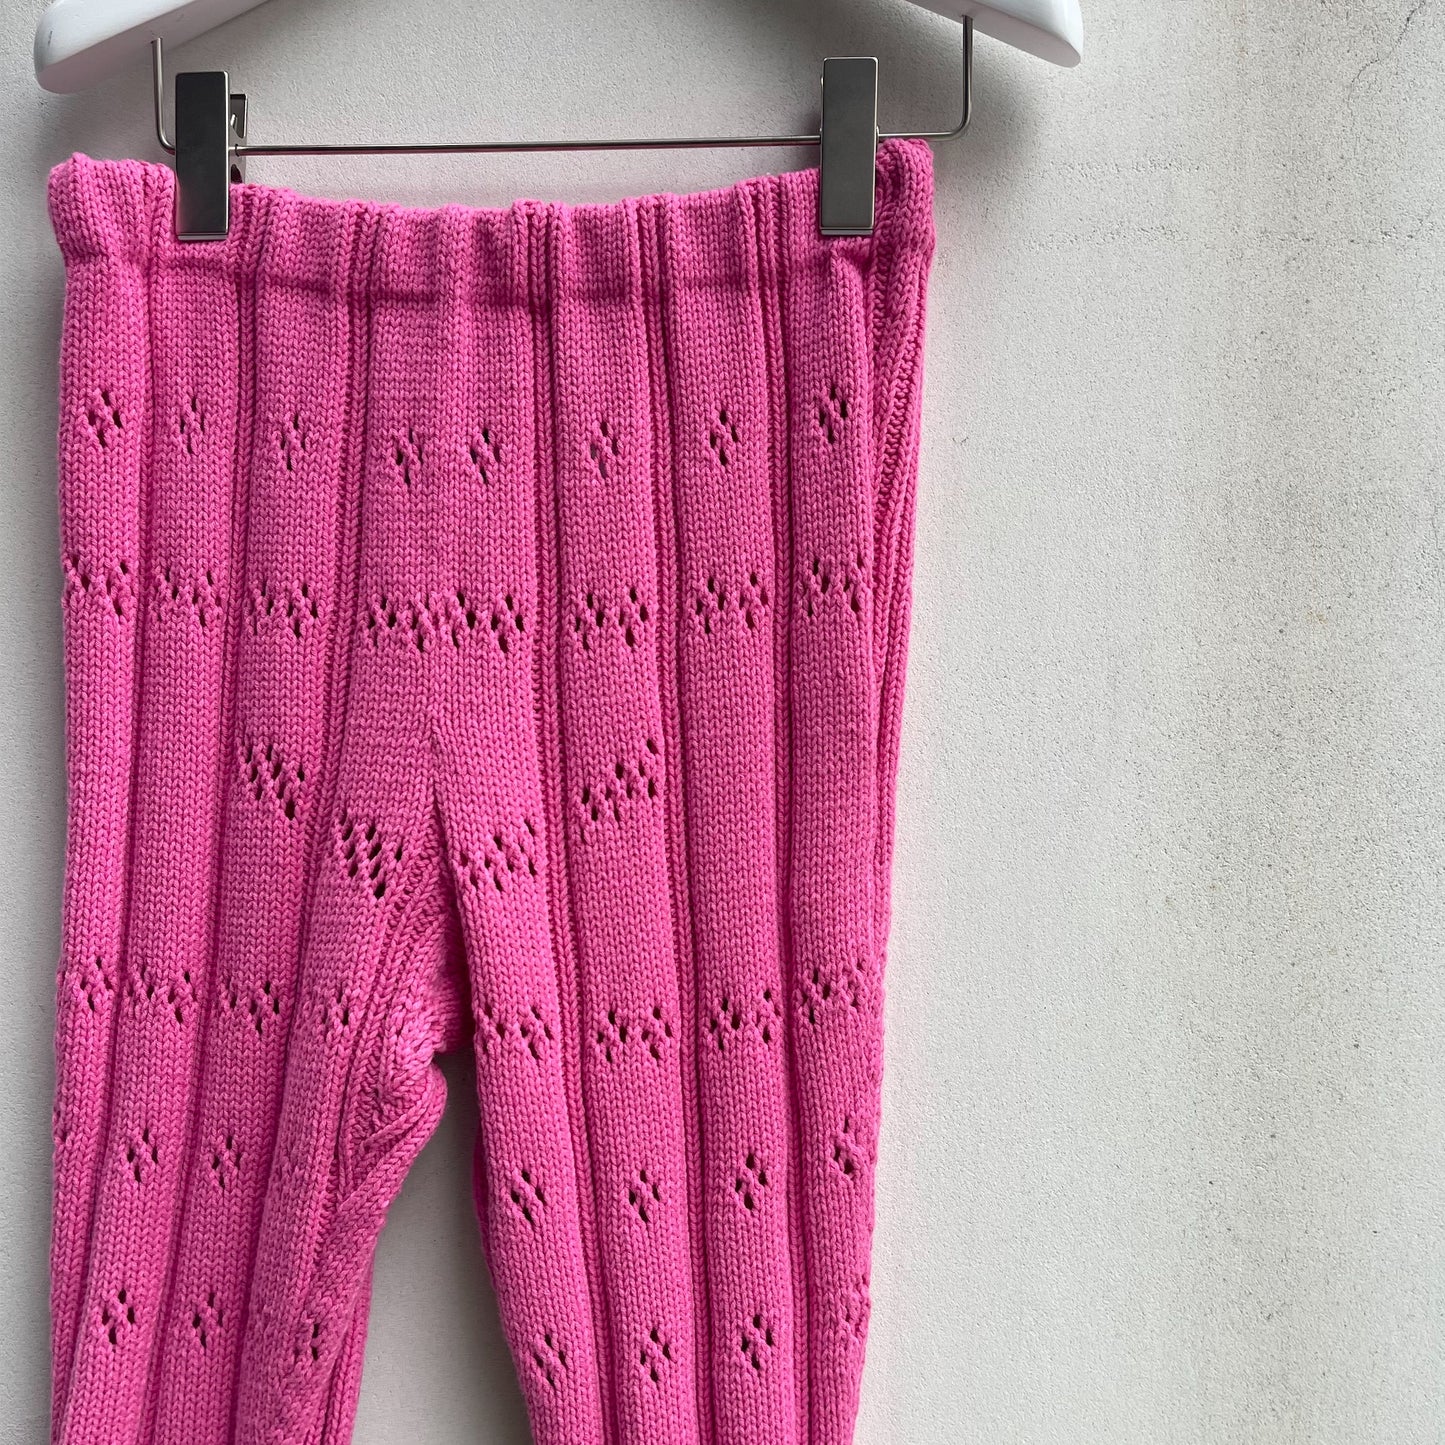 CLUELESS KNIT PANTS / PINK / ニットパンツ